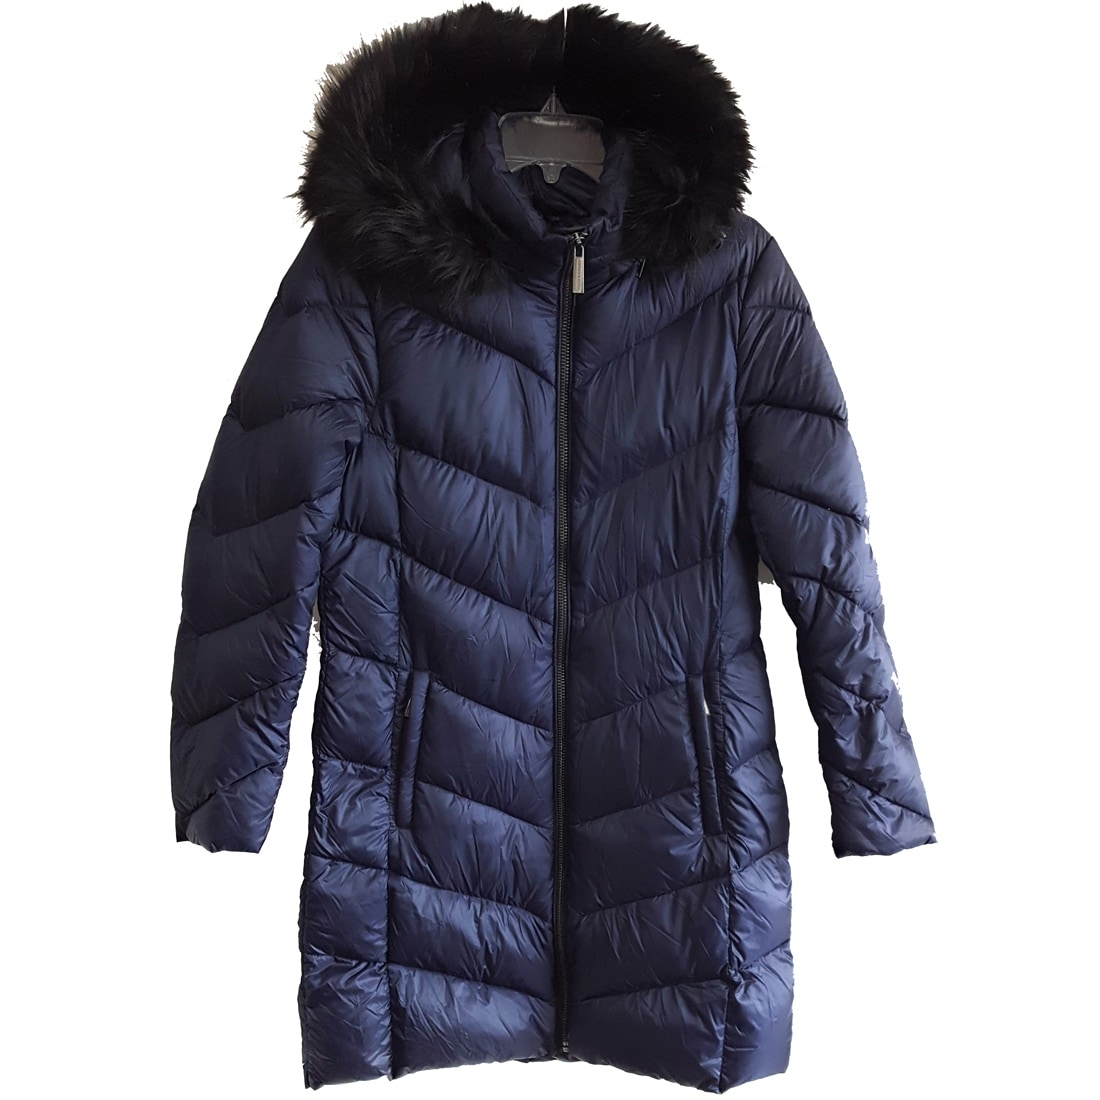 michael kors quilted packable jacket